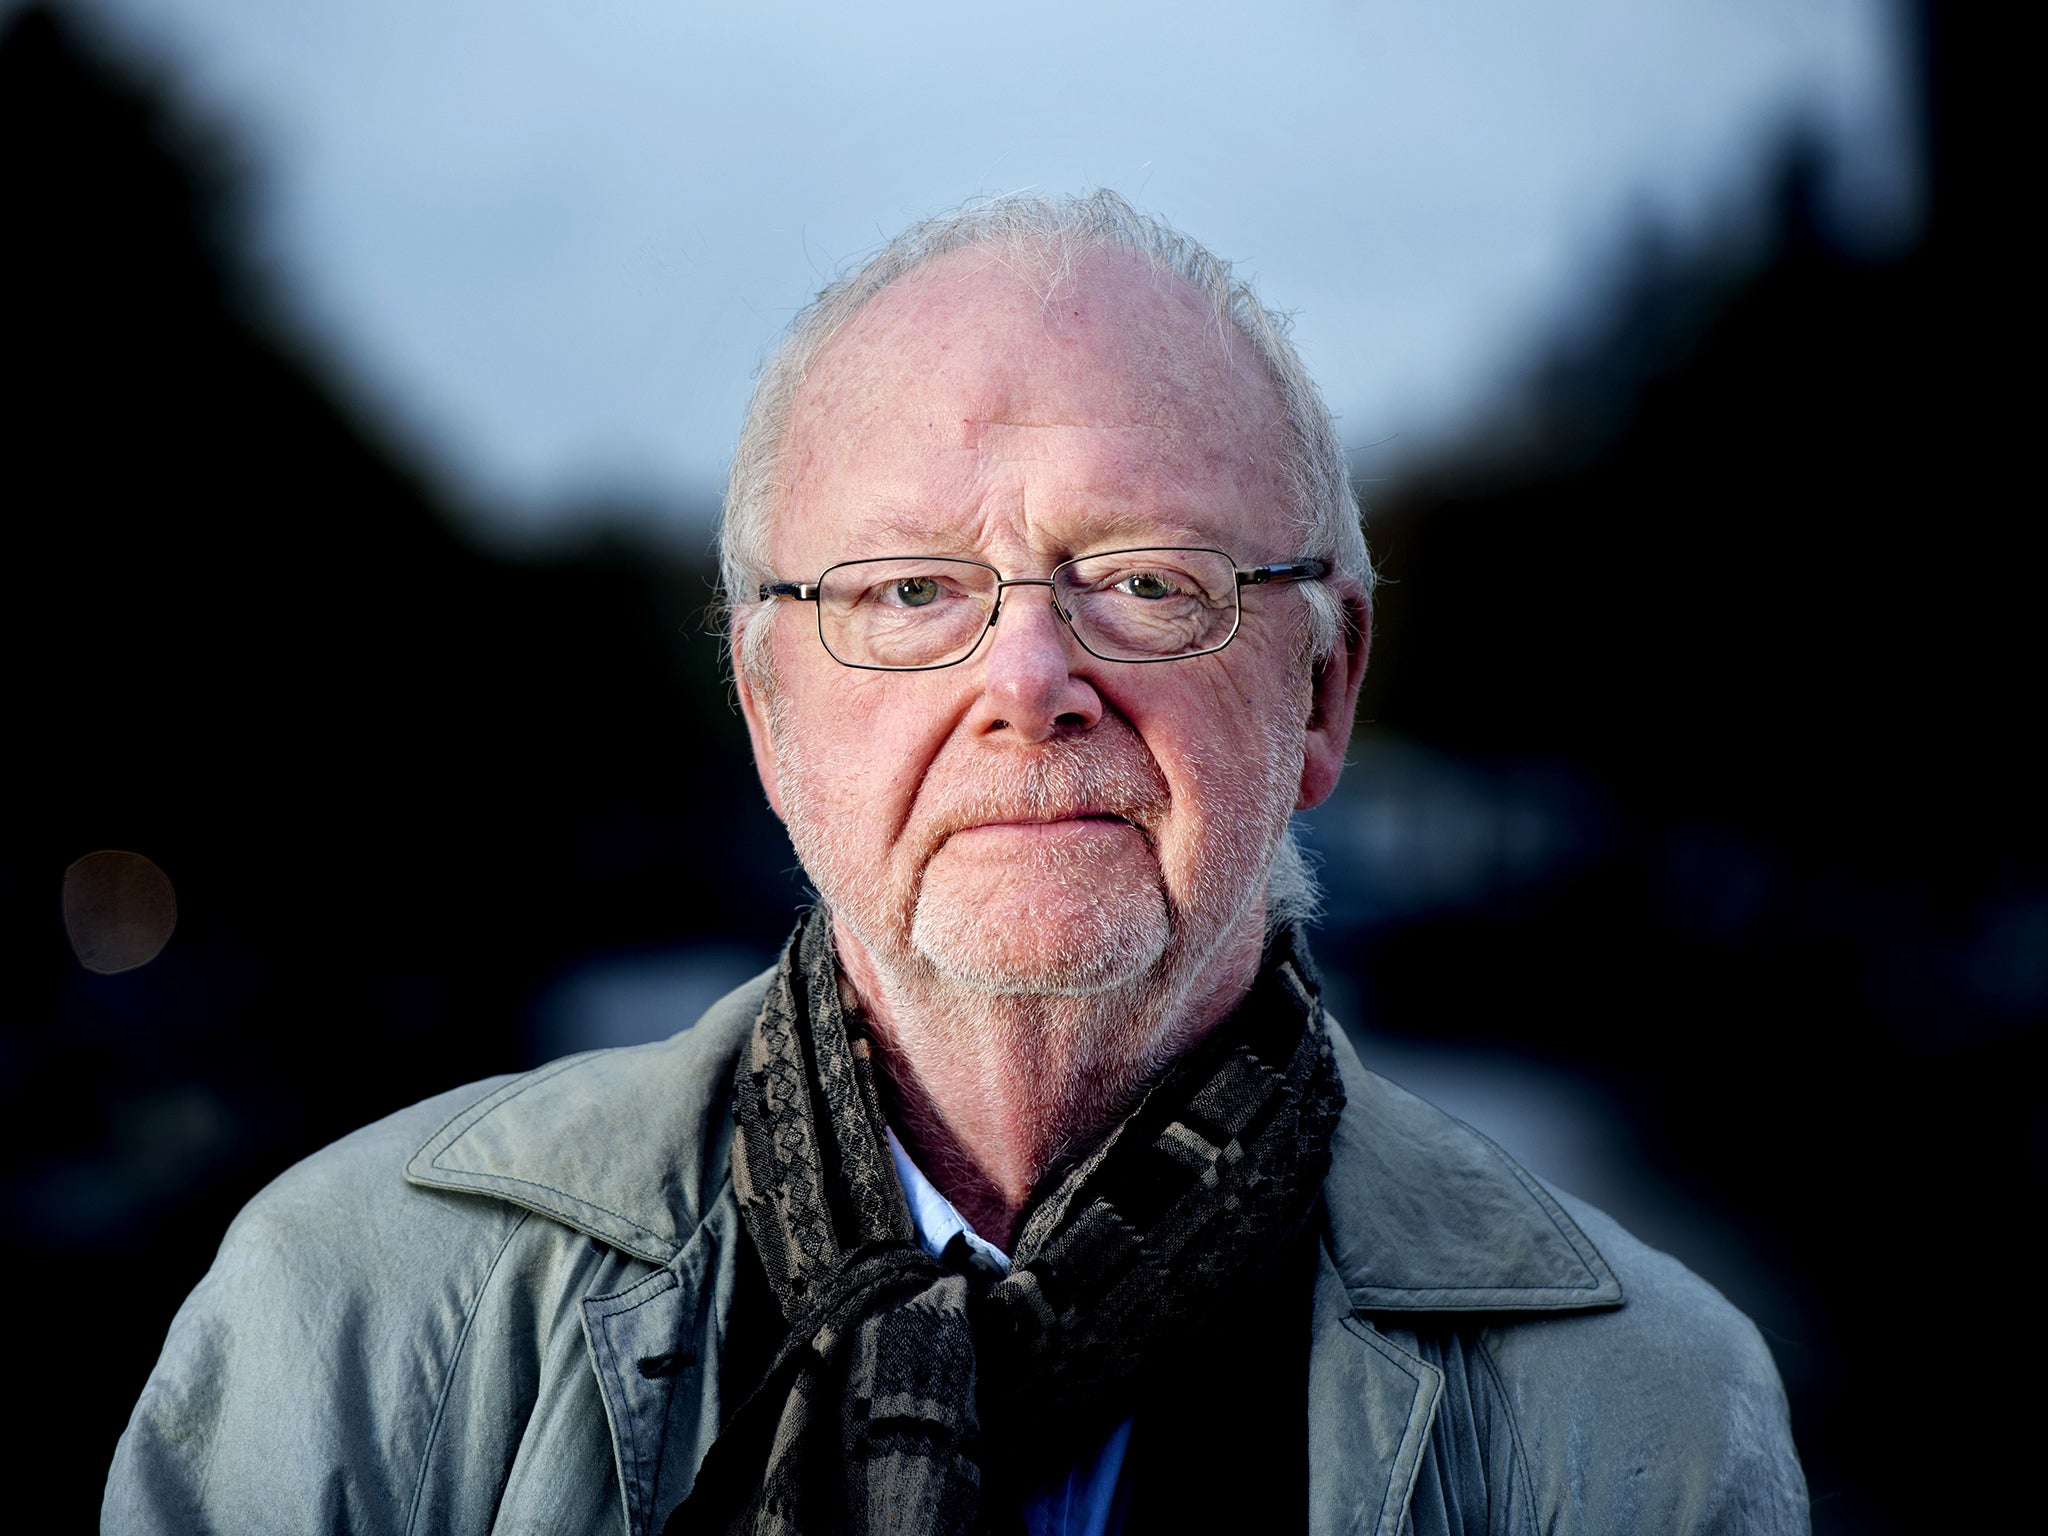 Dichotomy: Andriessen’s pieces were often in contrast to his calm character